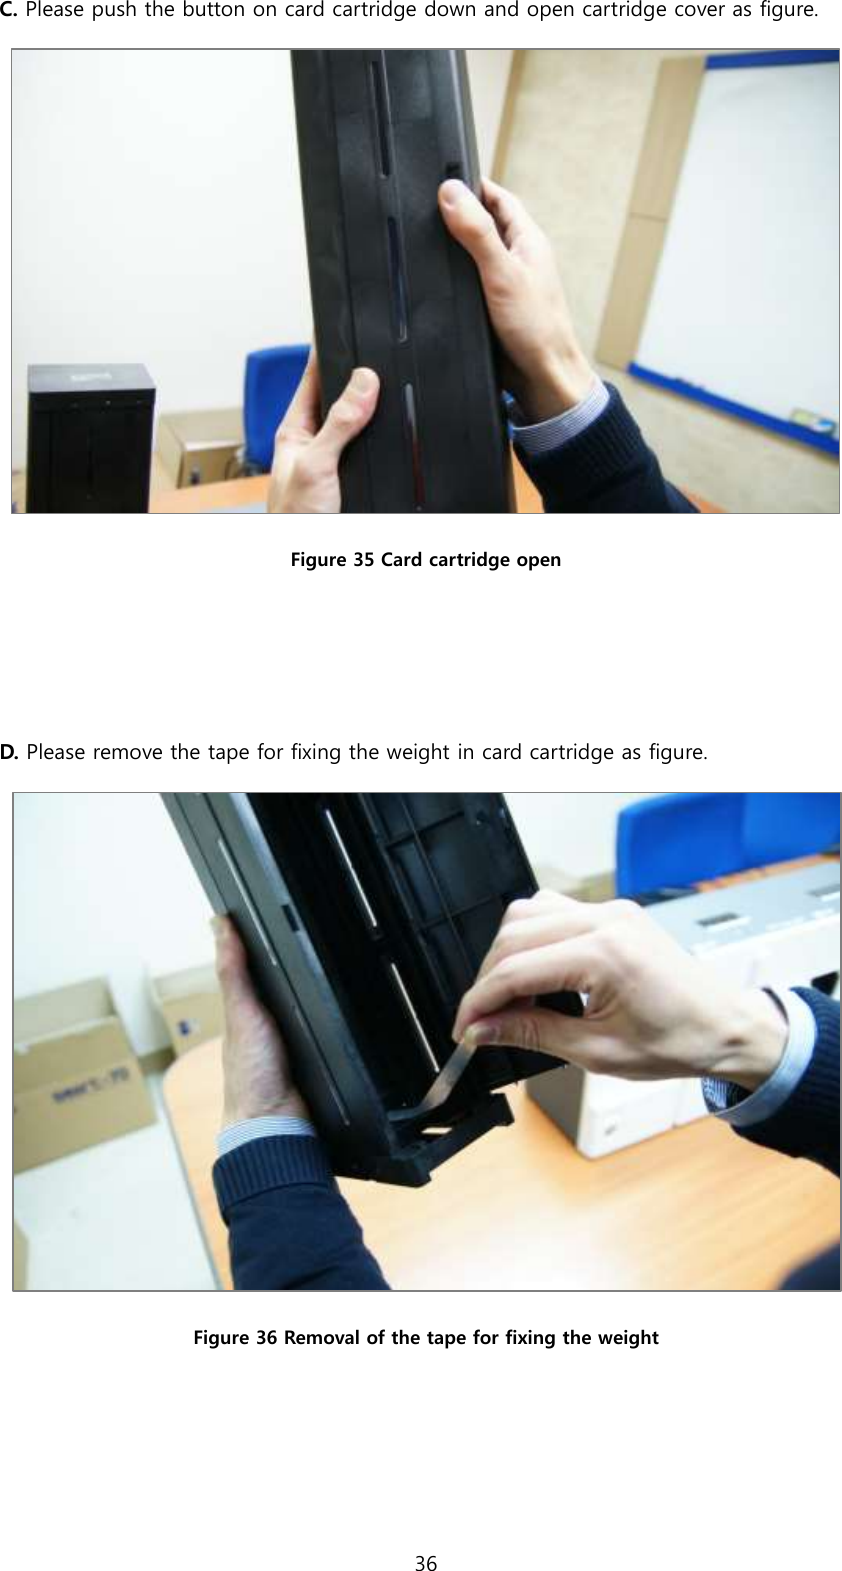 36  C. Please push the button on card cartridge down and open cartridge cover as figure.  Figure 35 Card cartridge open   D. Please remove the tape for fixing the weight in card cartridge as figure.  Figure 36 Removal of the tape for fixing the weight    